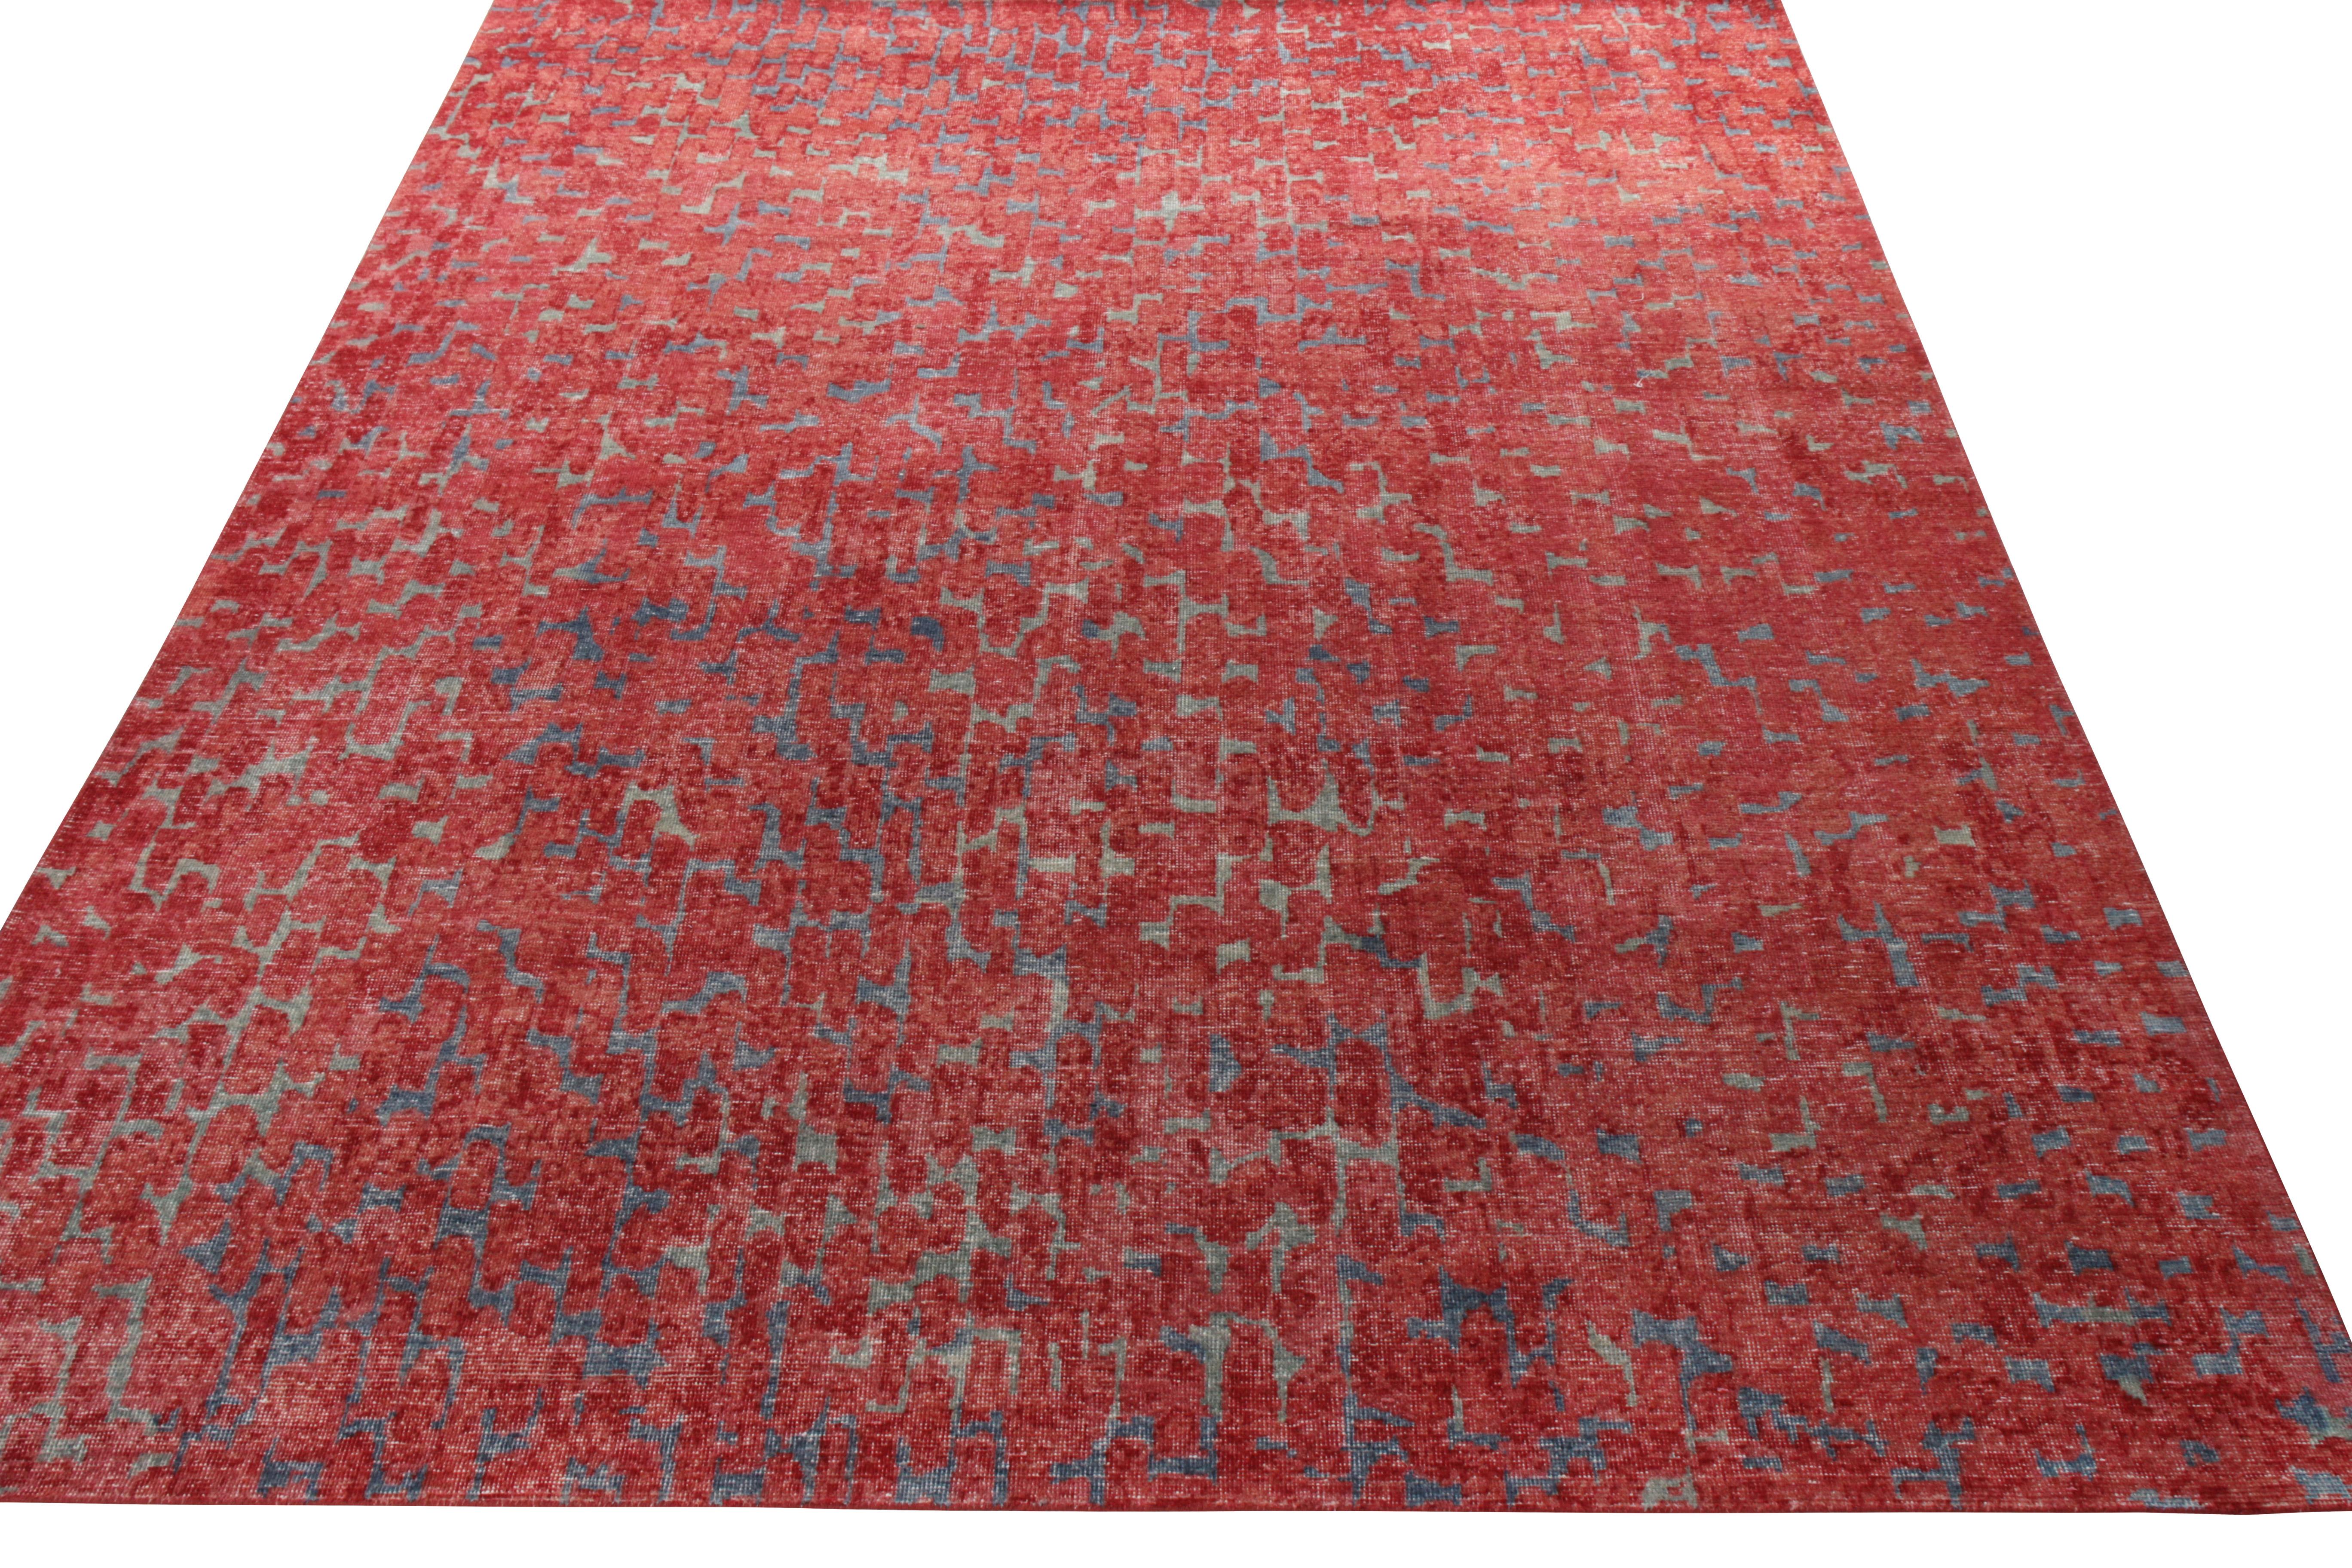 A 9x12 hand-knotted rug from Rug & Kilim’s Homage Collection. Embedded in modern imagination, the rug carries a shabby chic vibe that flourishes on the scale. The geometric pattern fills the frame in vivid shades of red and blue that further